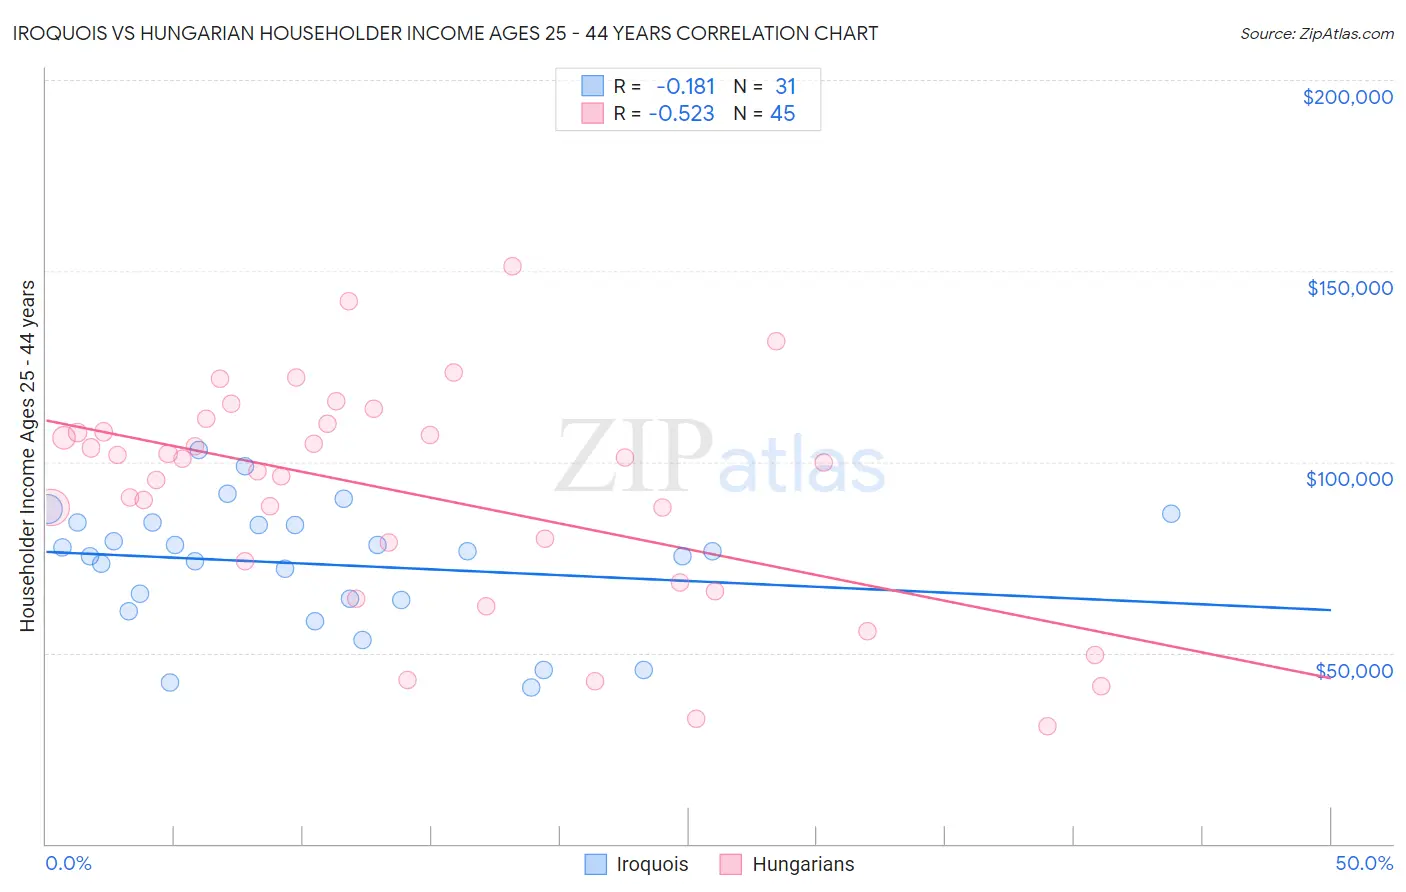 Iroquois vs Hungarian Householder Income Ages 25 - 44 years